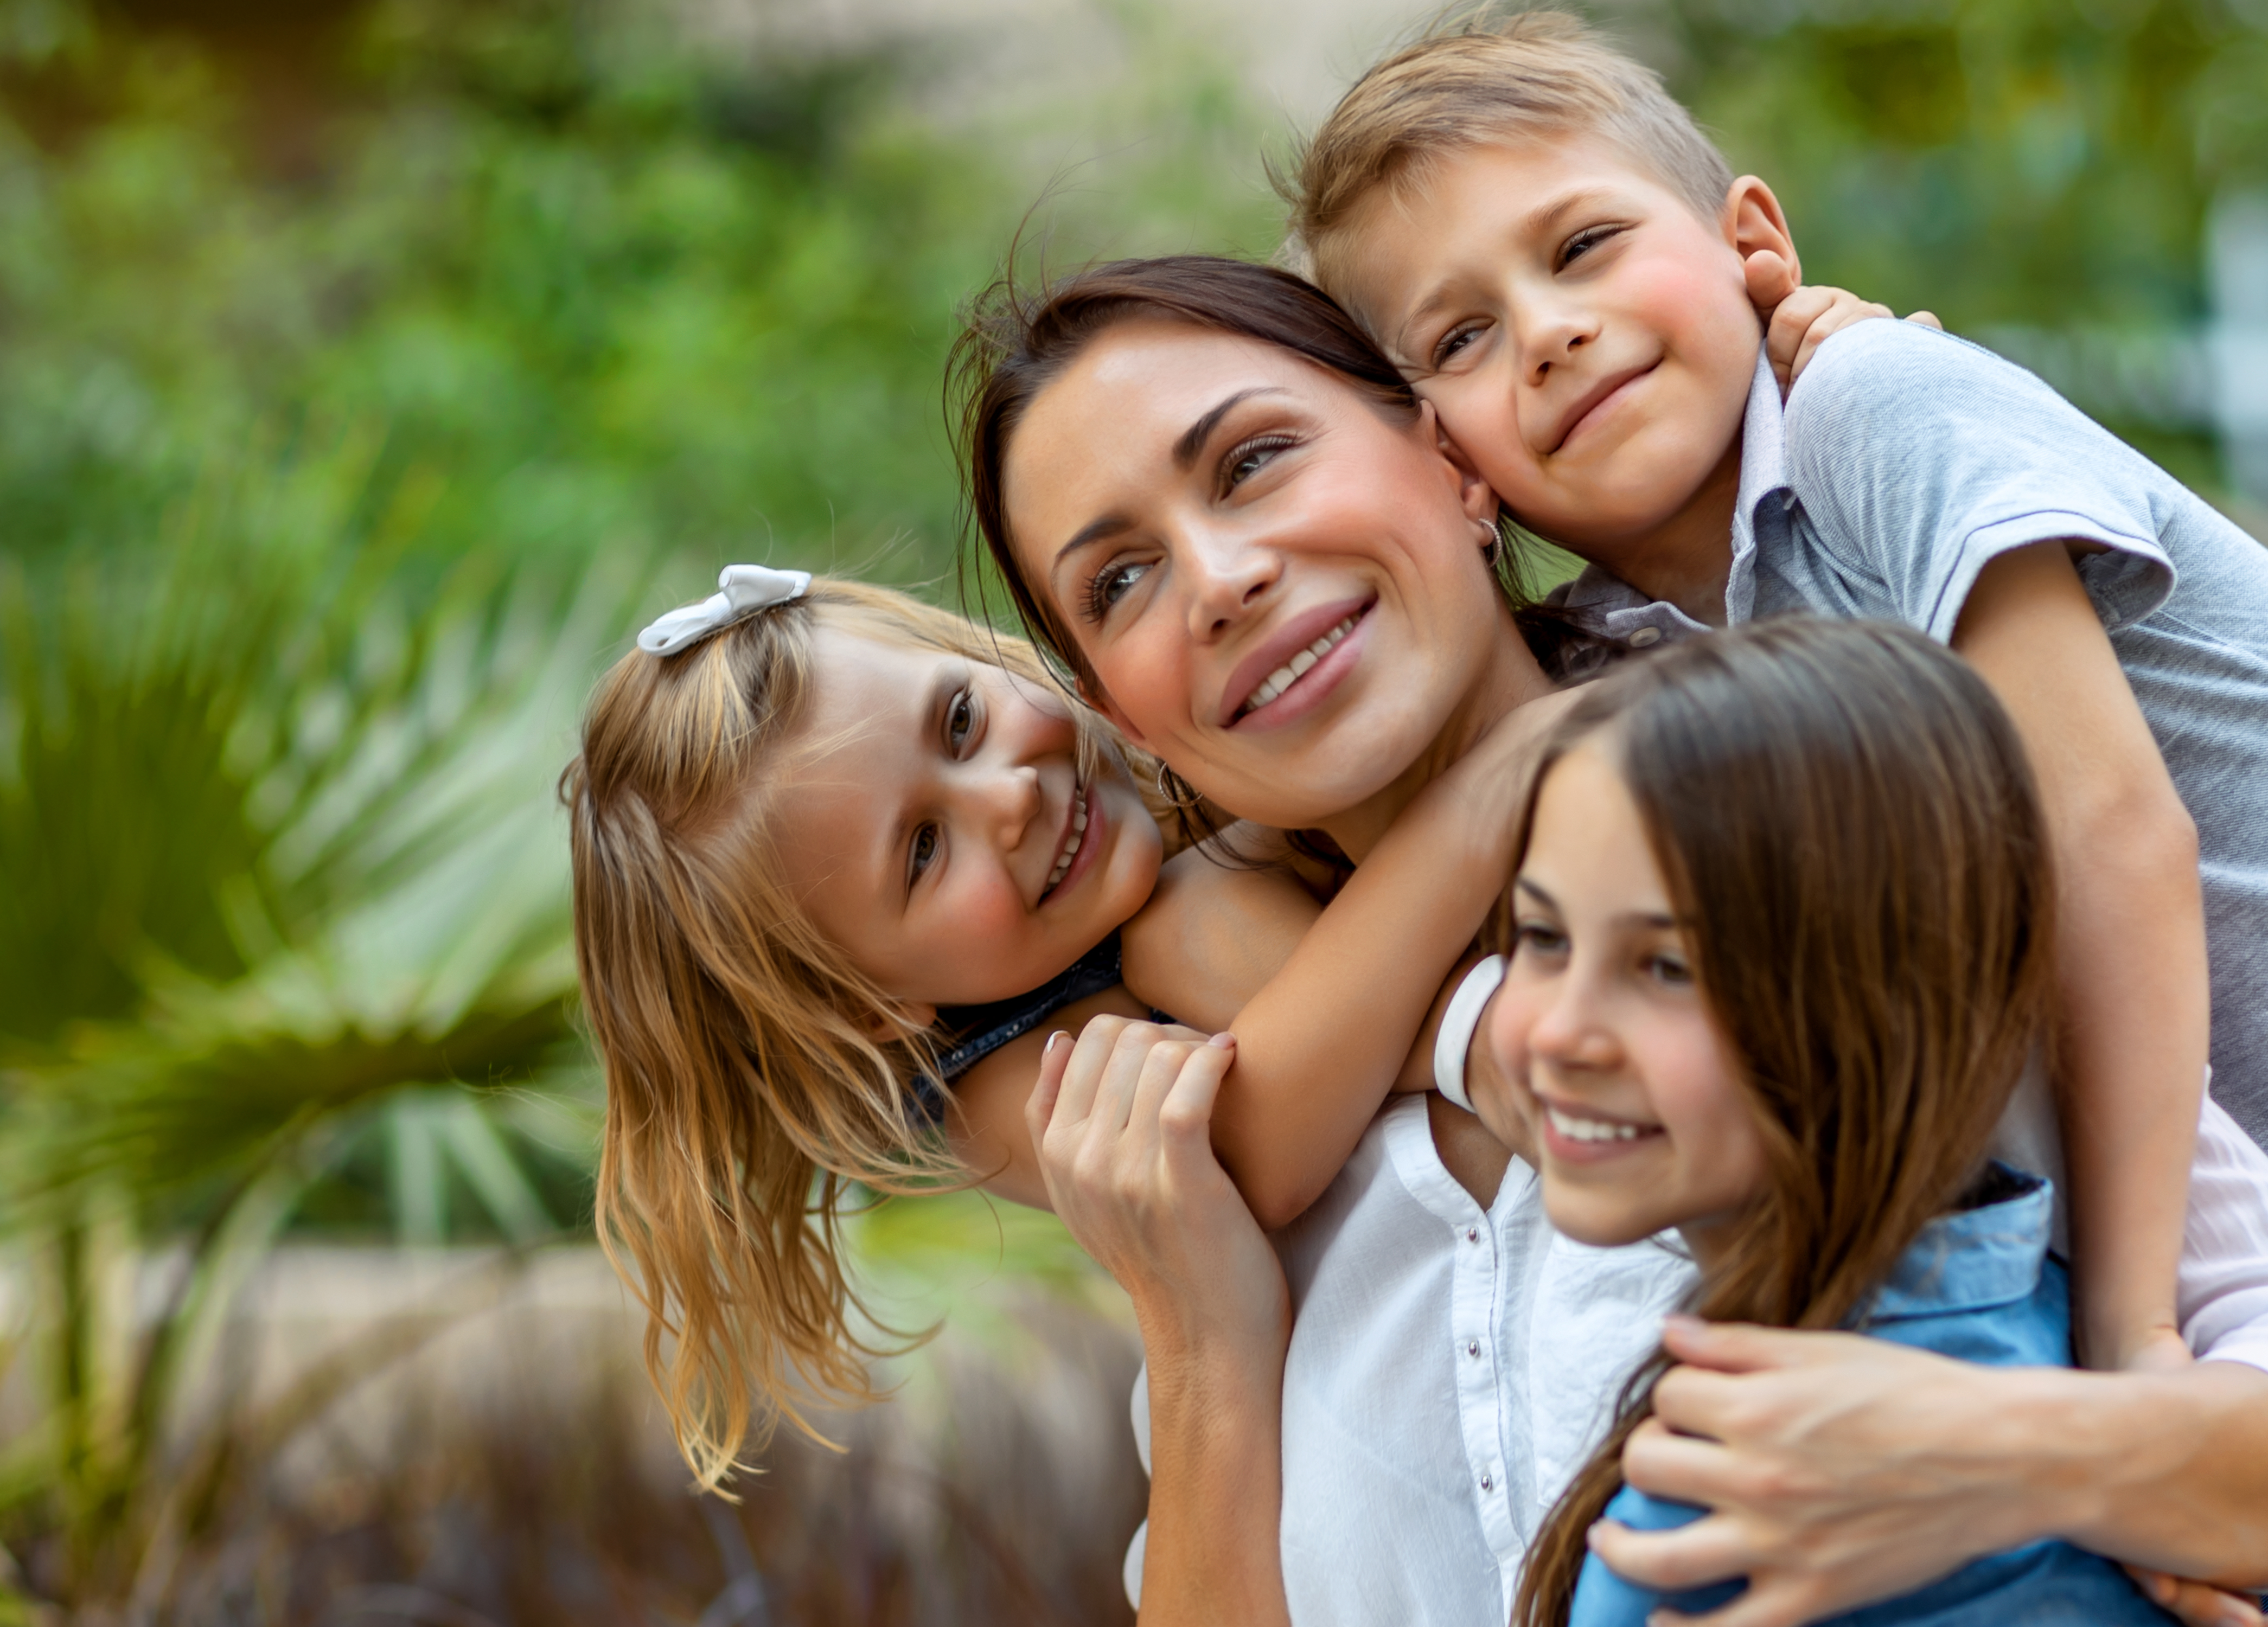 A candid shot of a mother having fun with her three children | Source: Shutterstock